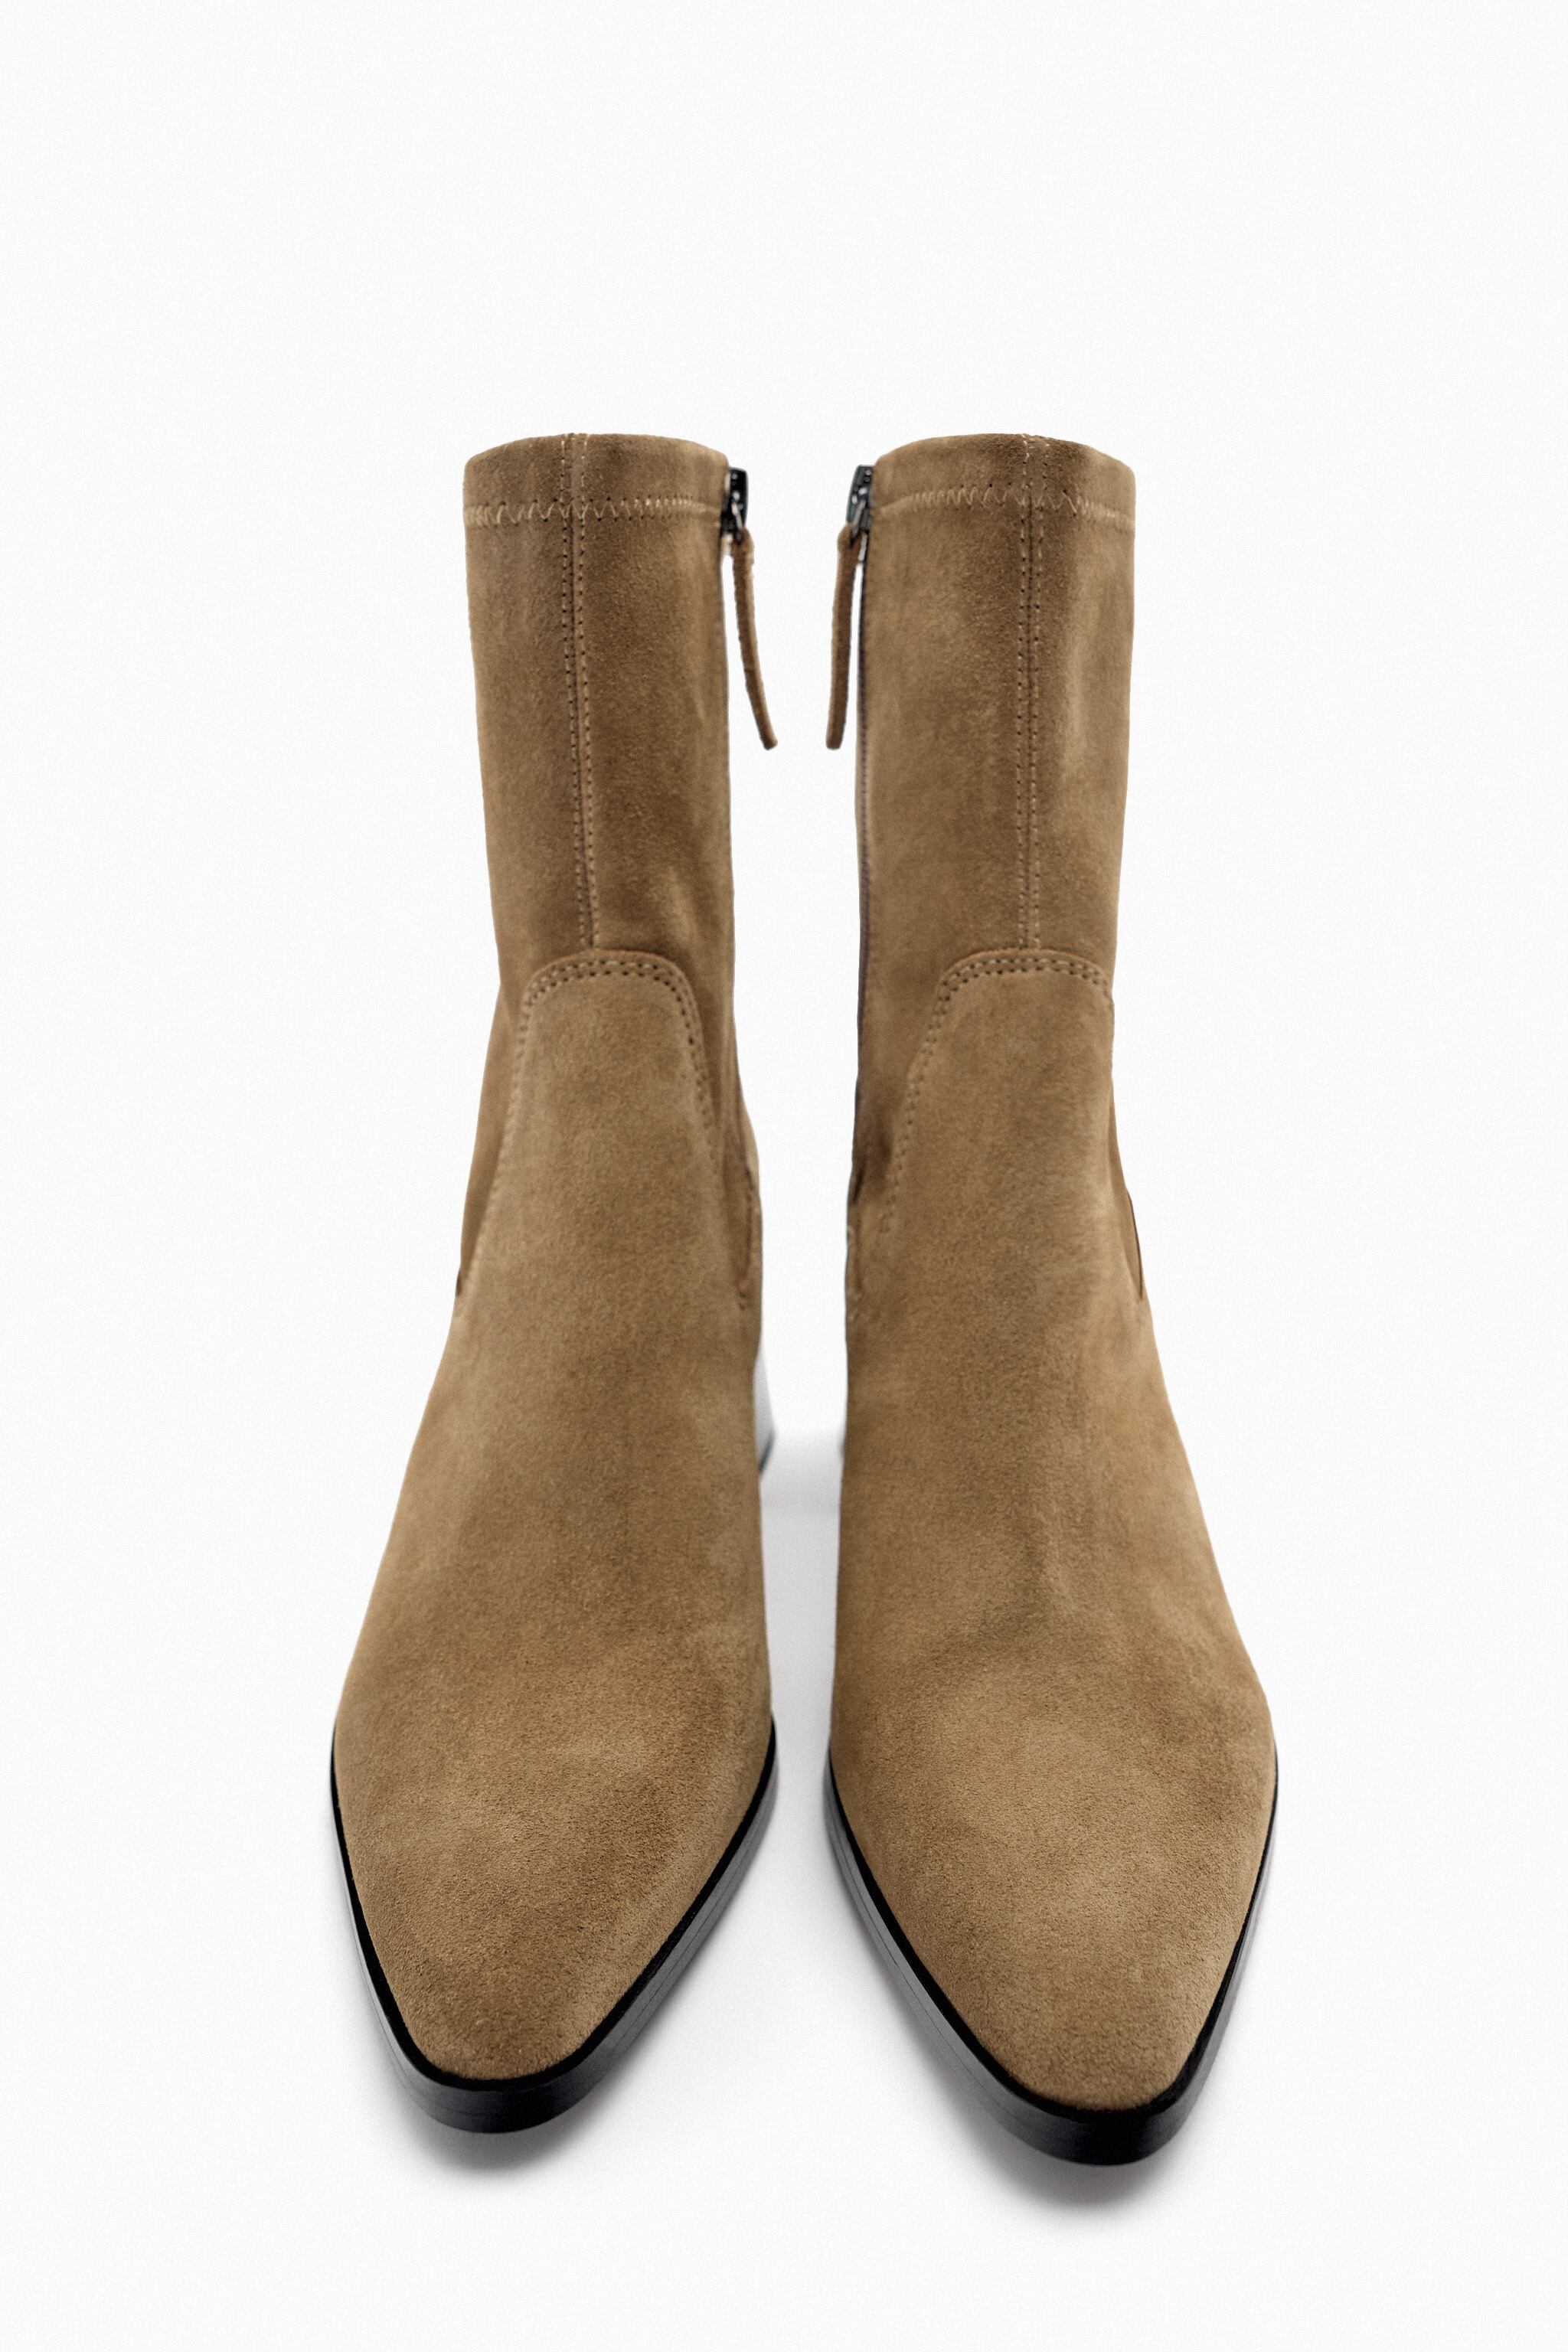 SUEDE HEELED ANKLE BOOTS